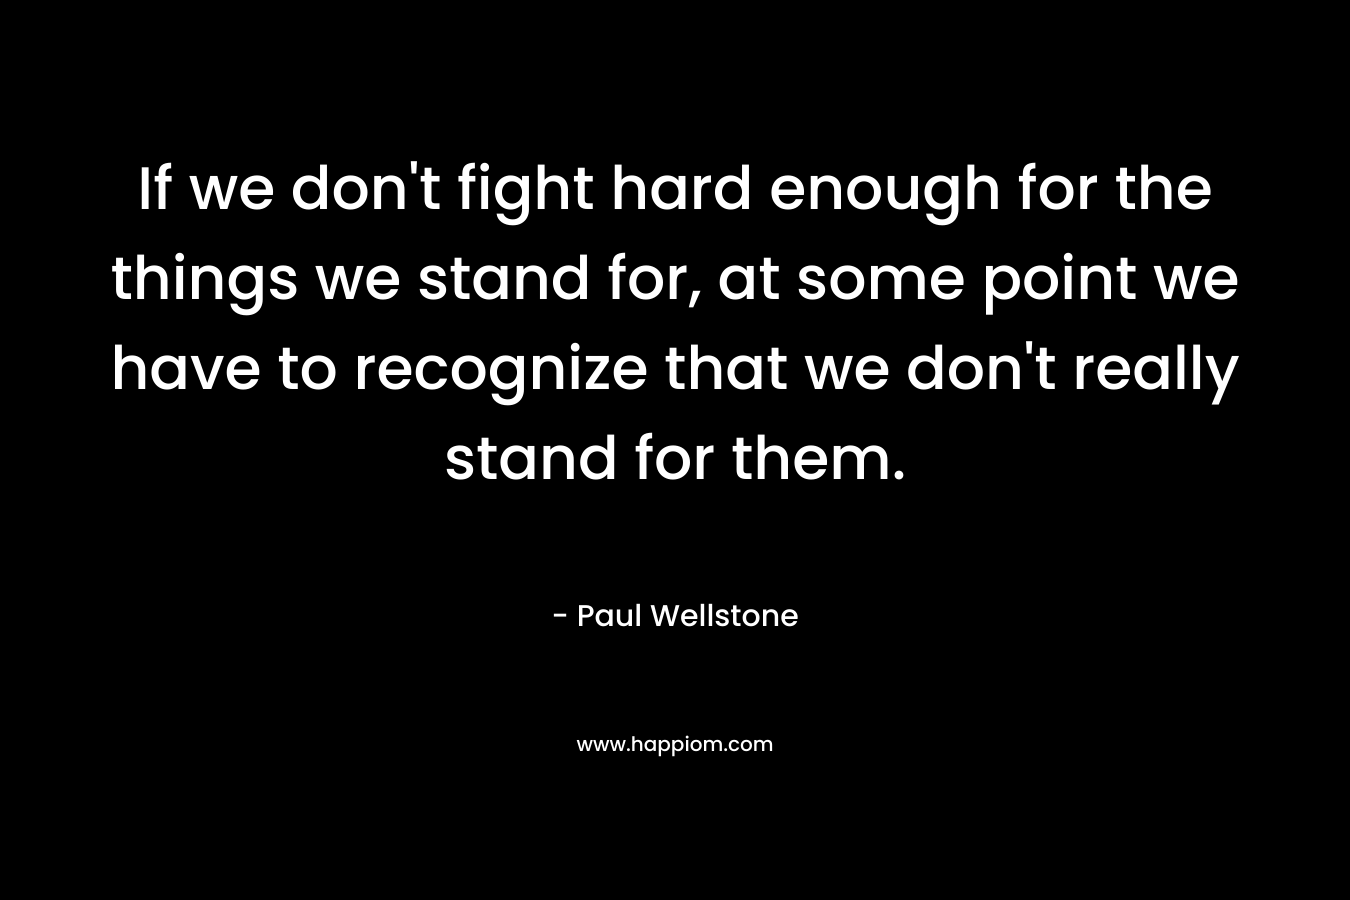 If we don’t fight hard enough for the things we stand for, at some point we have to recognize that we don’t really stand for them. – Paul Wellstone